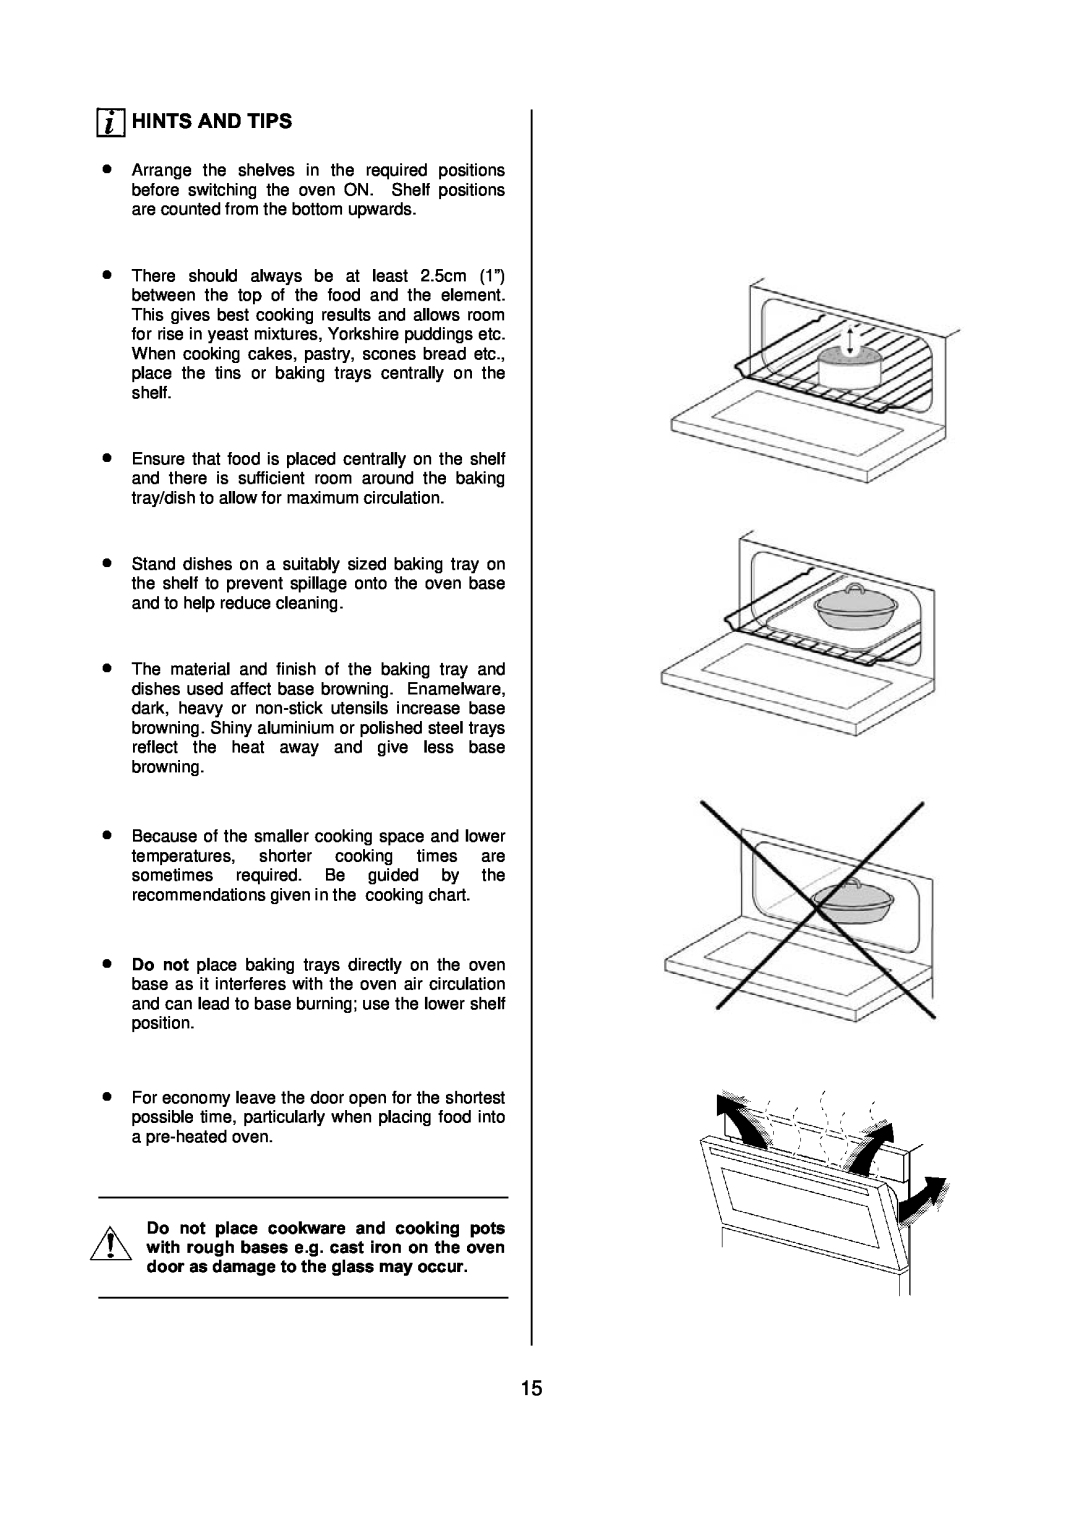 Electrolux D77000 user manual Hints And Tips, a pre-heated oven 